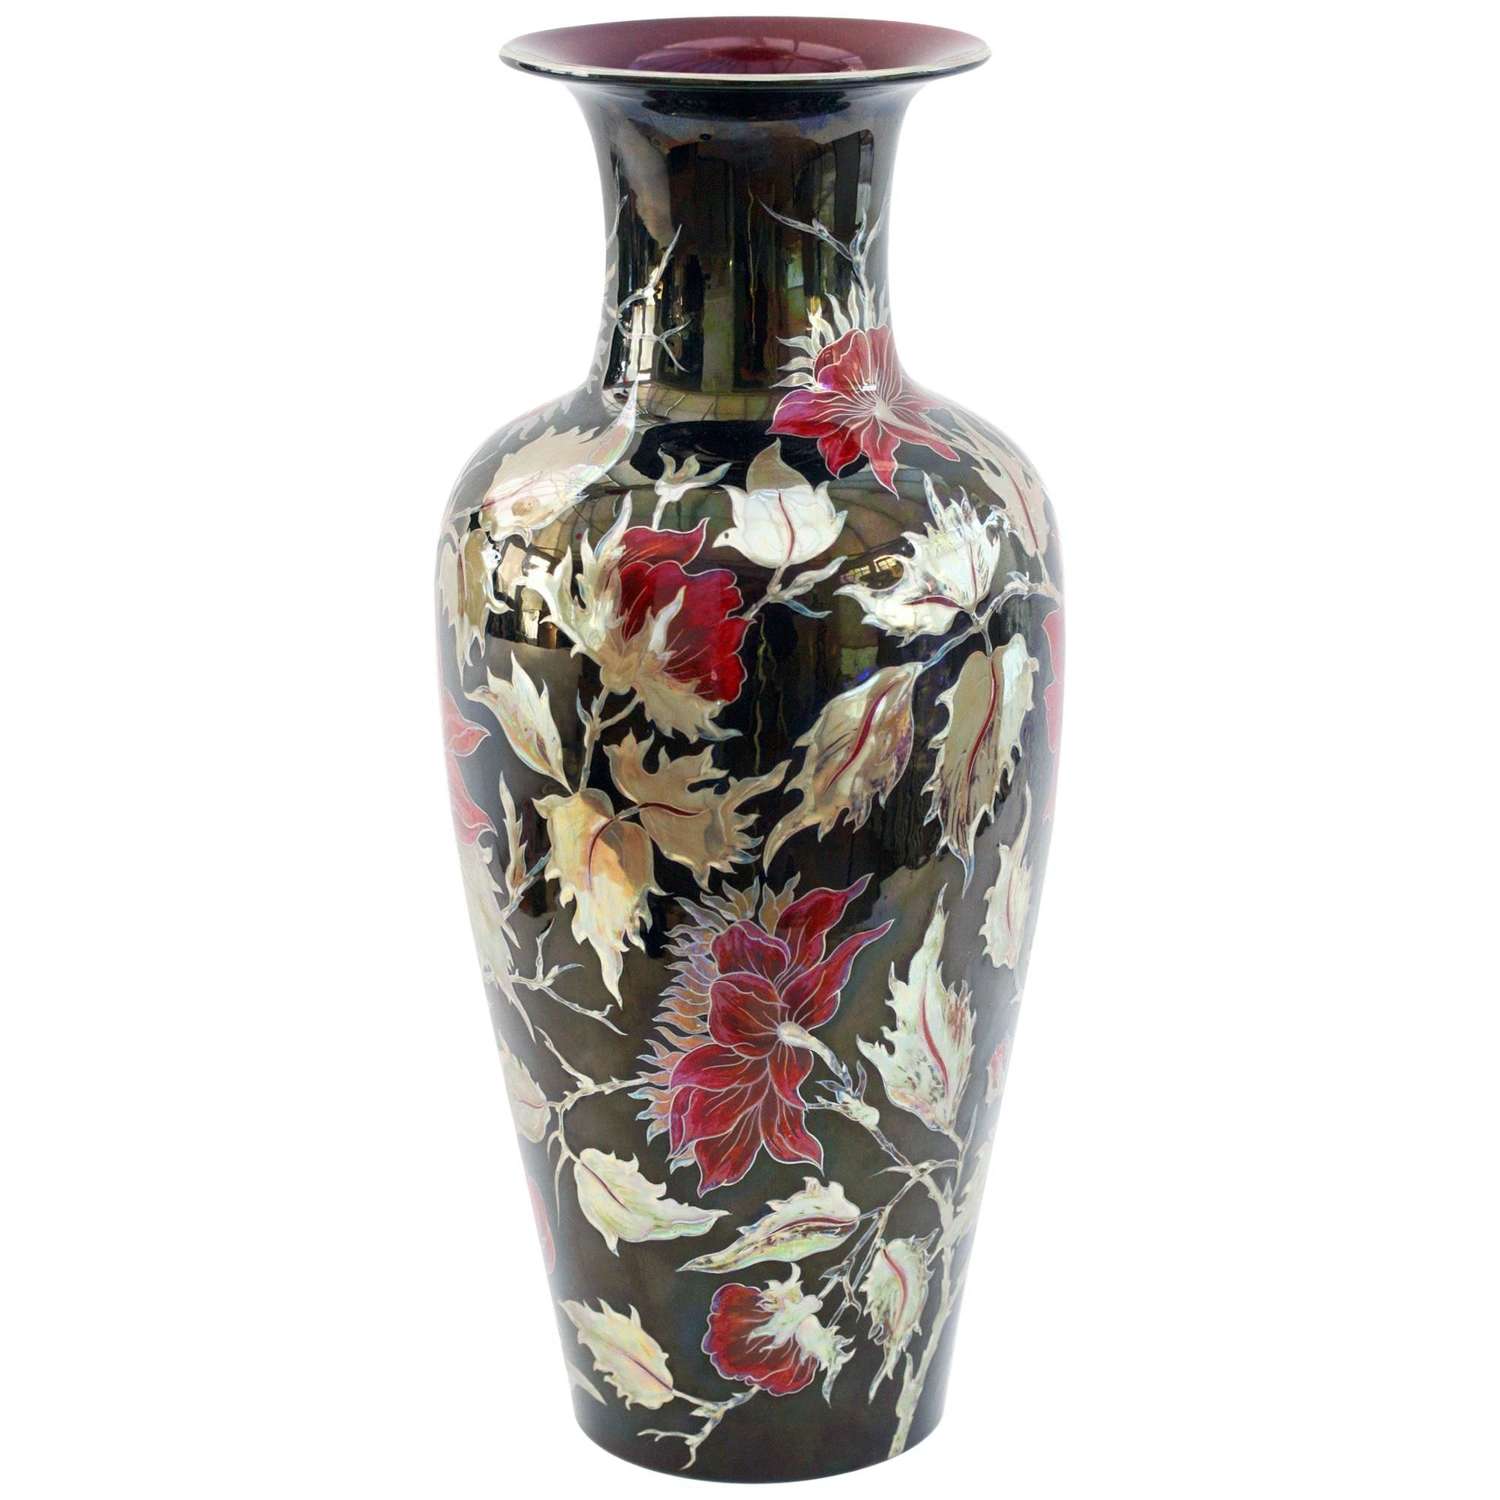 Zsolnay Pecs Exceptional Eosin Glazed Floral Painted Vase by M Spercze